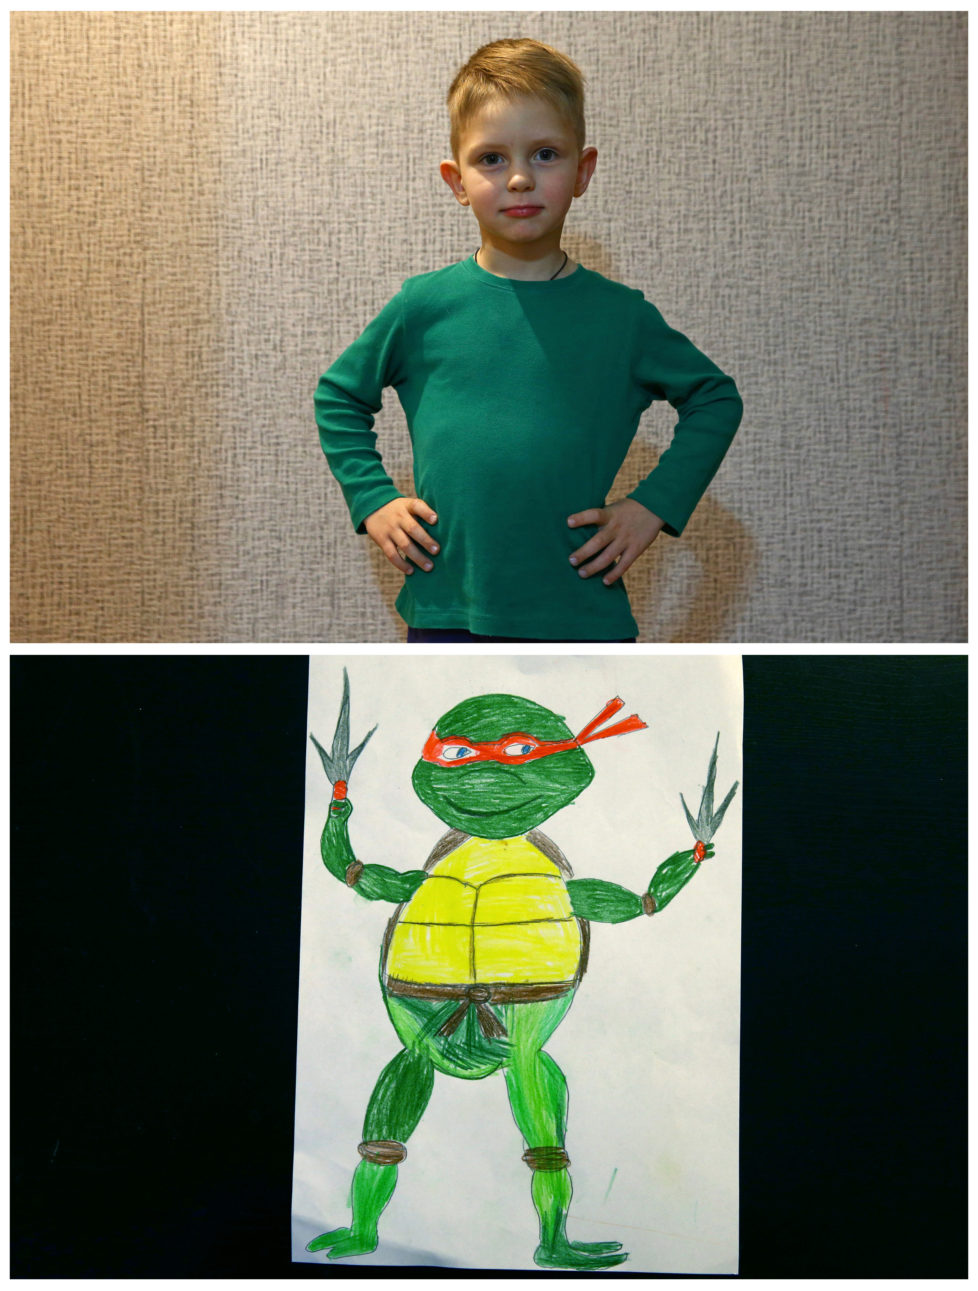 A combination picture shows Dmitriy Kuchur, 5, posing for a photograph at his house (top) and his drawing of what he wants to get for Christmas from Santa, in Minsk, Belarus, November 23, 2016. Dmitriy wants Teenage Mutant Ninja Turtles. Reuters photographers around the world asked children to draw what they wanted to receive from Santa for Christmas. REUTERS/Vasily Fedosenko SEARCH "CHRISTMAS WISHES" FOR THIS STORY. SEARCH "WIDER IMAGE" FOR ALL STORIES. - RTSV37N